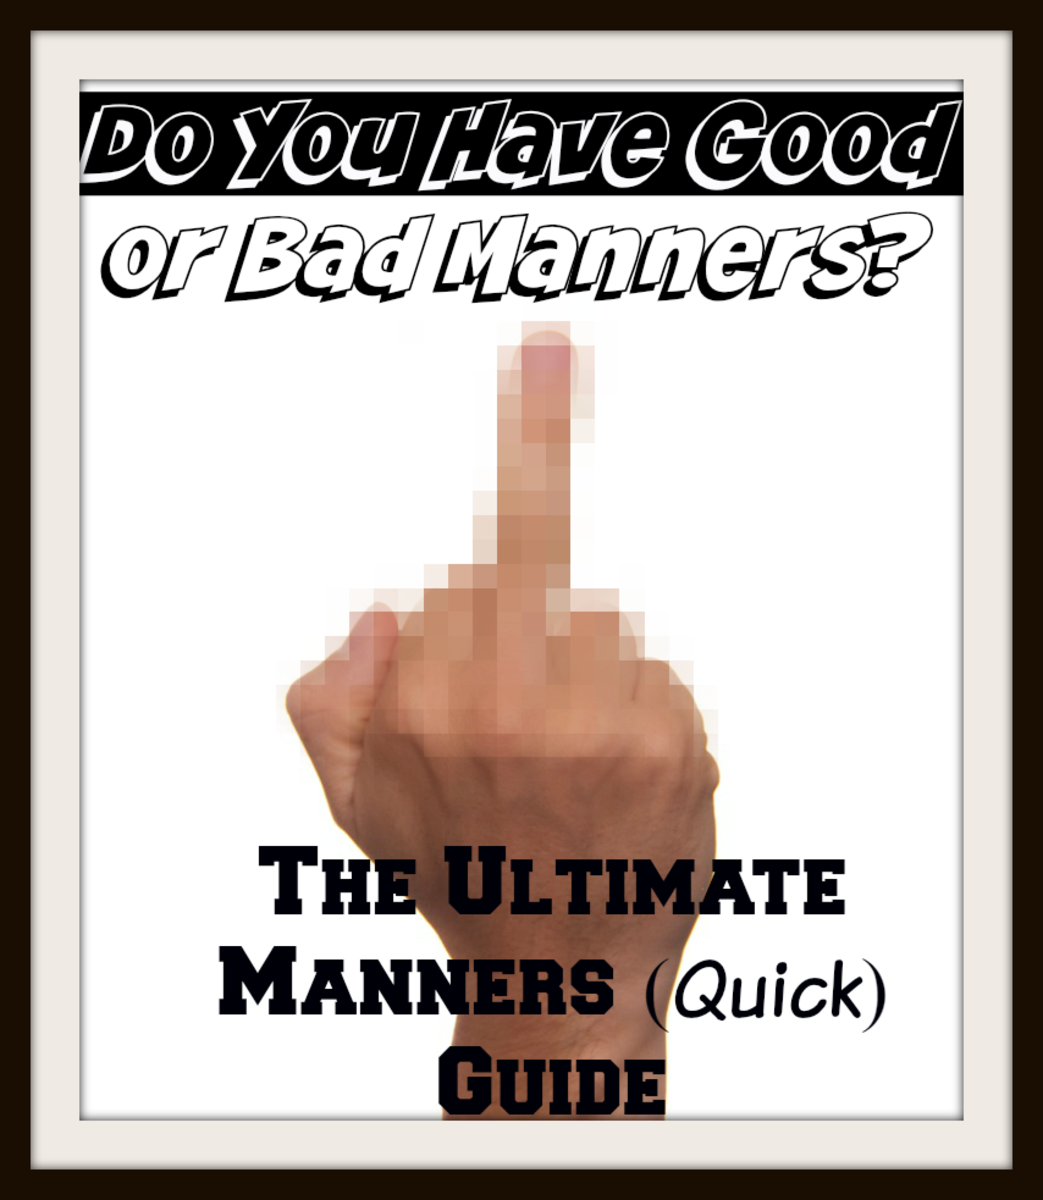 Bad manners are not limited to things we say or do; many gestures are very rude